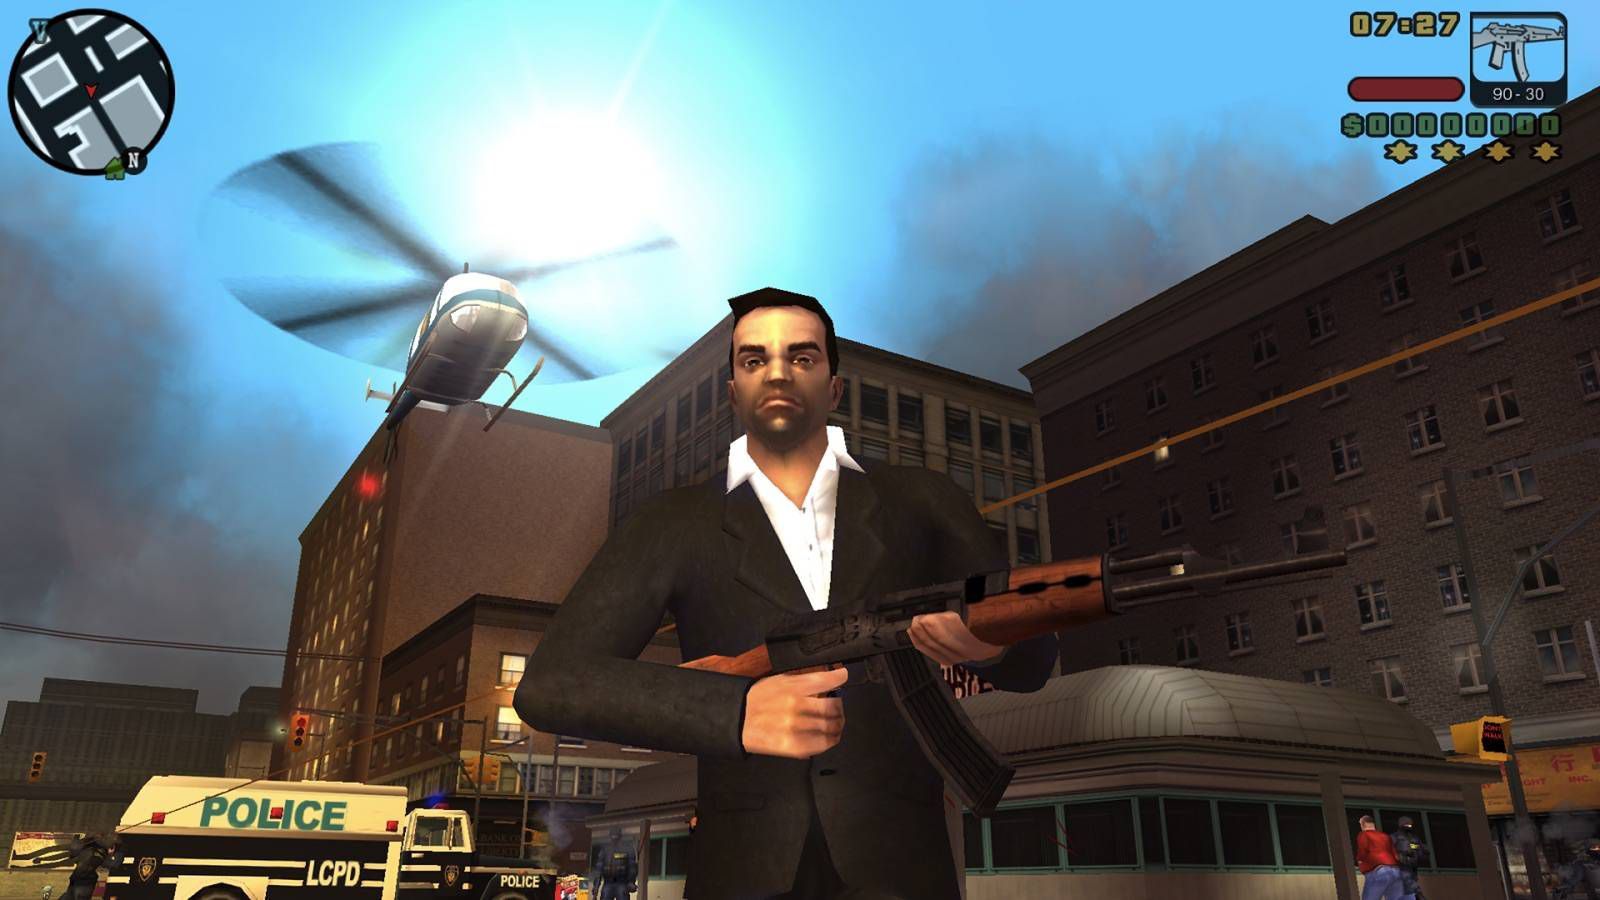 Grand Theft Auto: Liberty City Stories Is An Action Adventure Game Set In An Open World Environment And Pla. Grand Theft Auto, Grand Theft Auto Games, Story Games